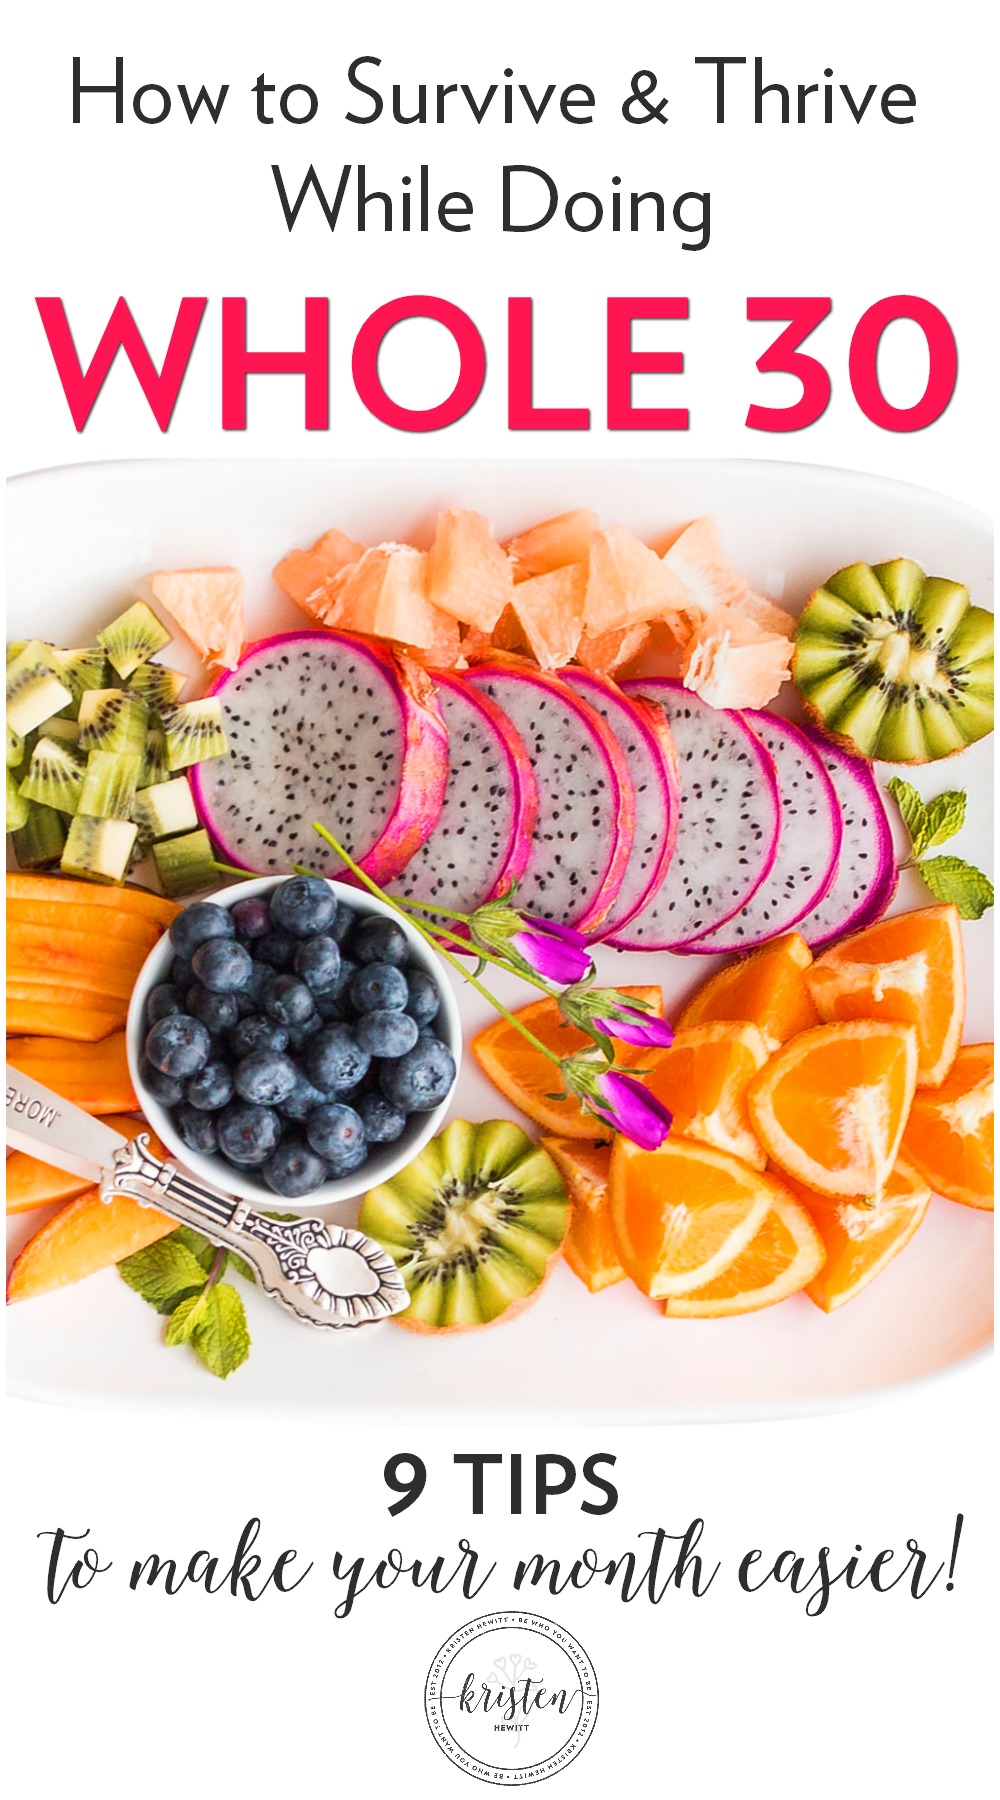 Are you thinking of doing Whole 30? Before you start, read this so you can thrive and survive the whole 30 lifestyle! Good luck!